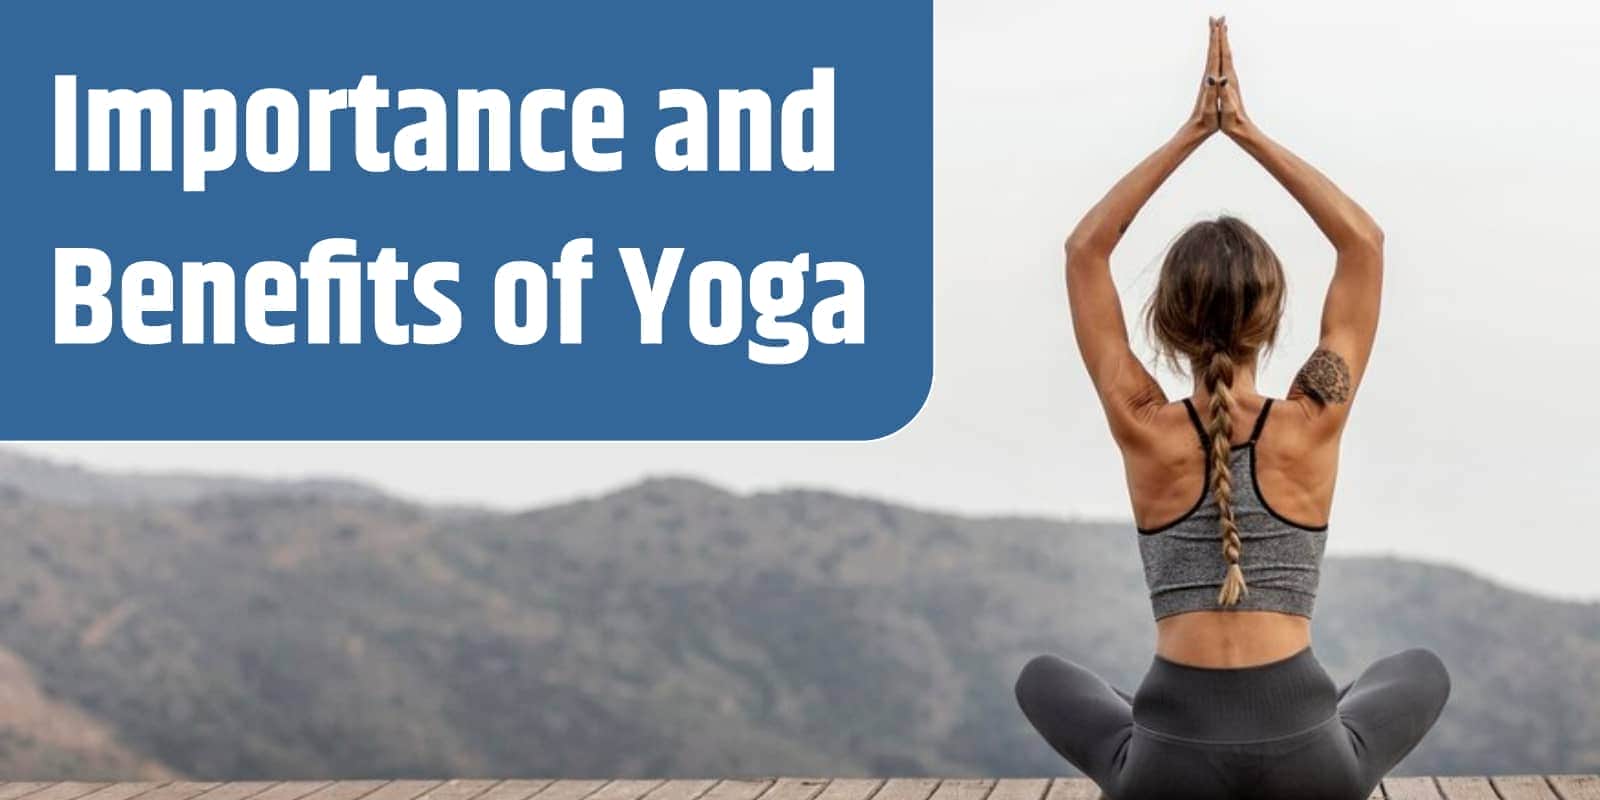 Importance and Benefits of Yoga